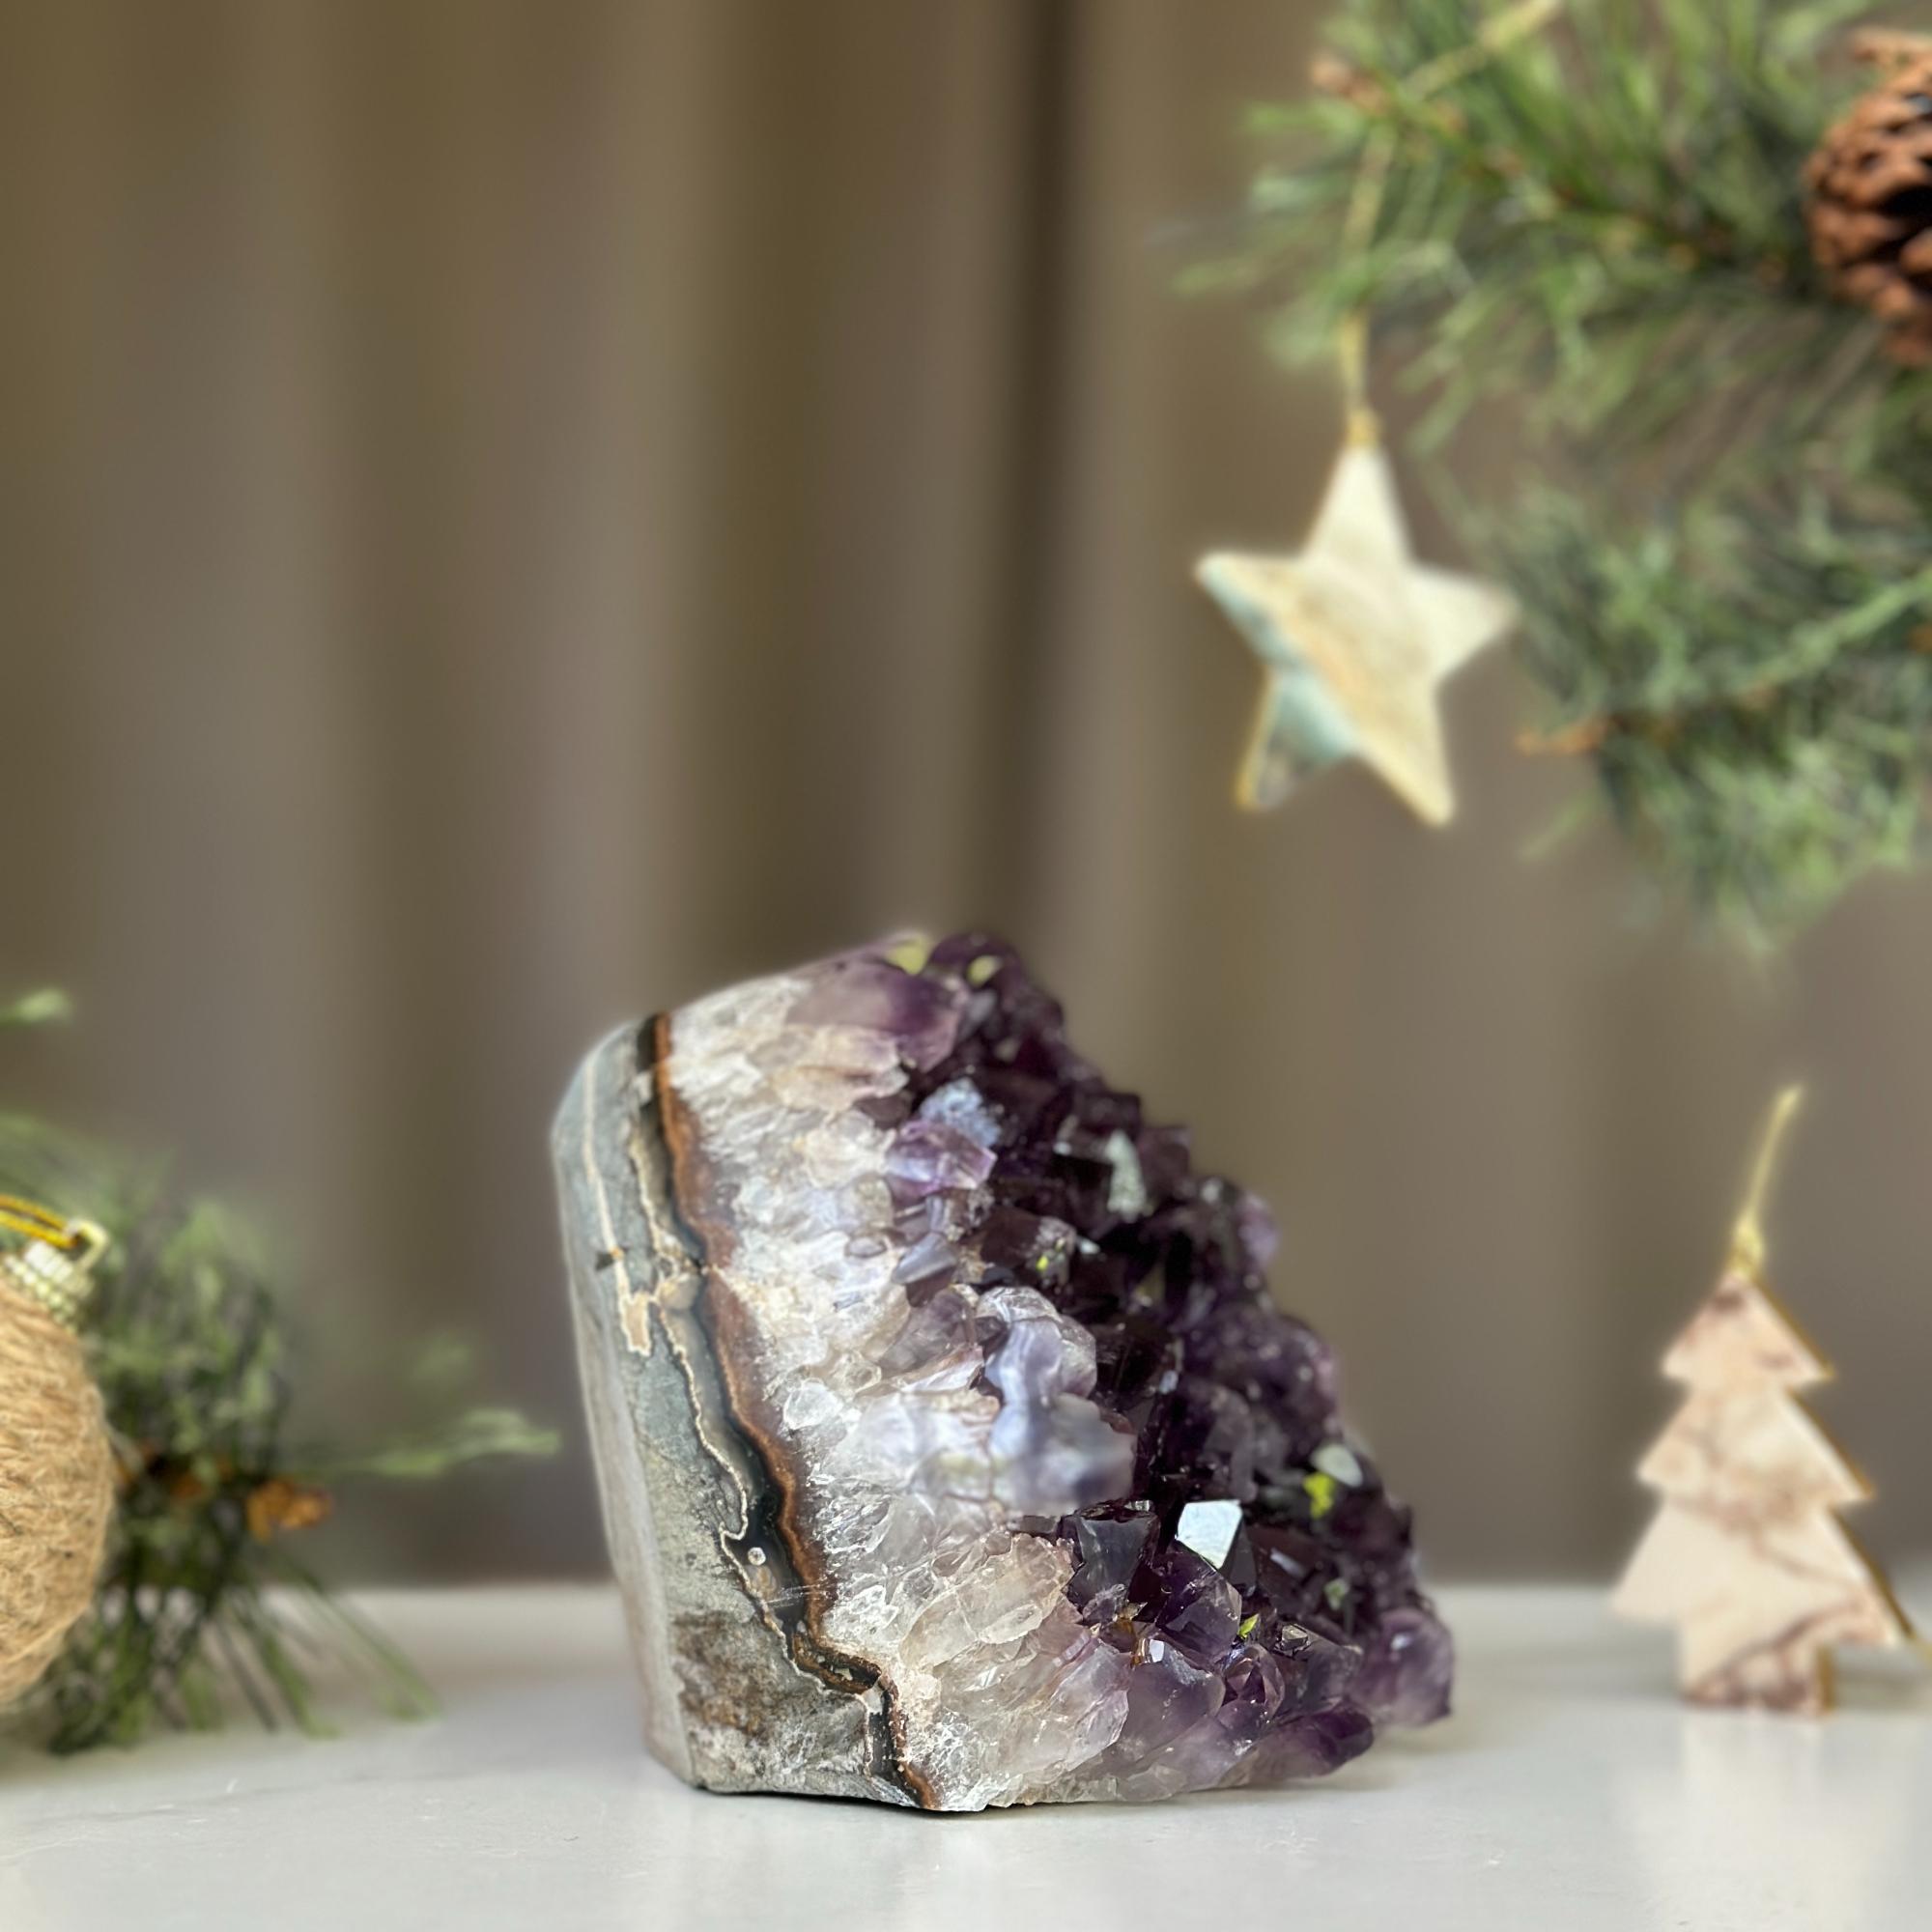 Amethyst cathedral with FREE GIFT BOX, Crystal rocks for sale